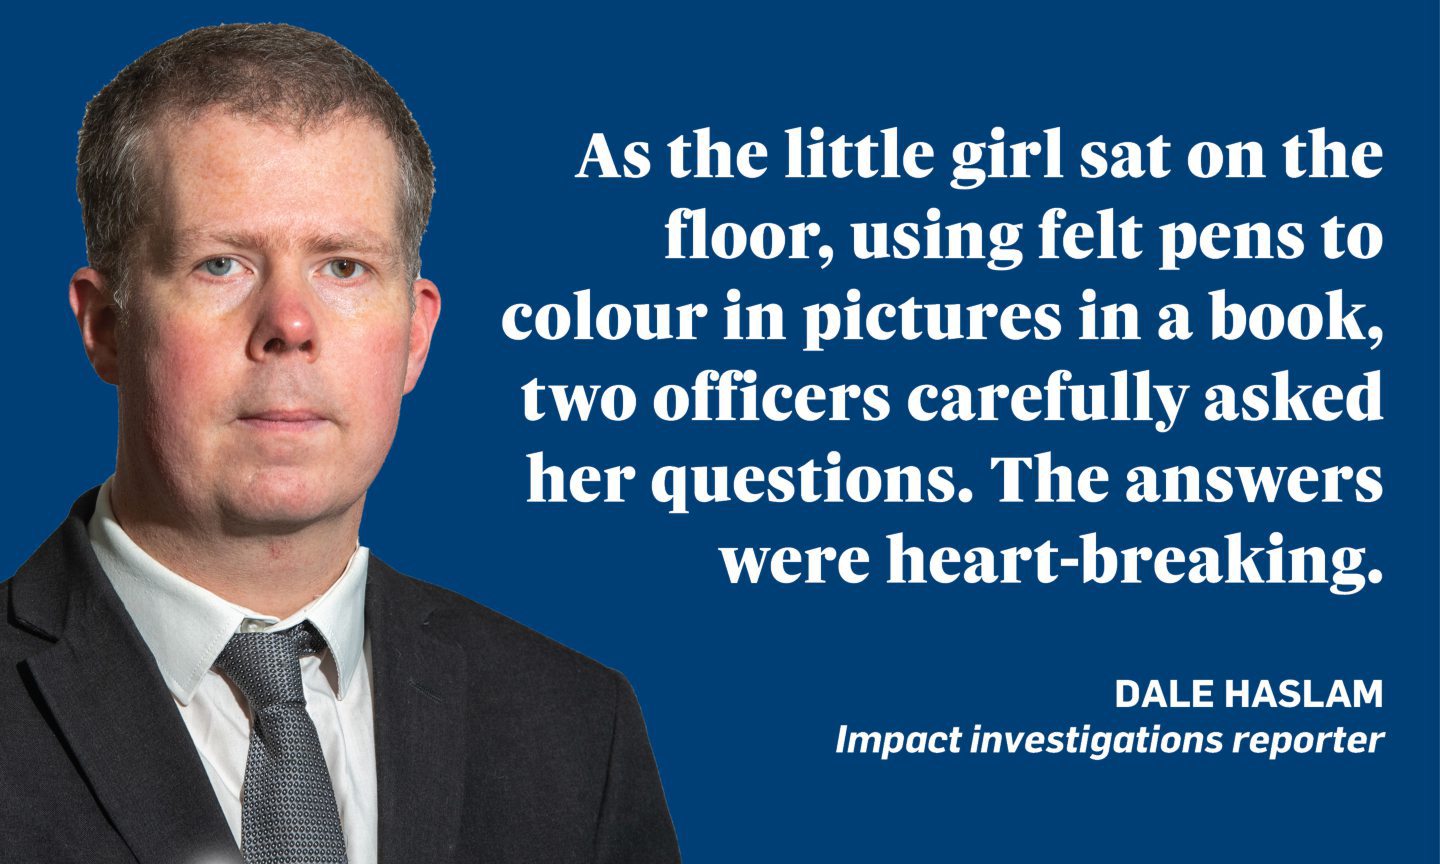 Quotation from Dale Haslam: " As the little girl sat on the floor, using felt pens to colour in pictures in a book, two officers carefully asked her questions. The answers were heart-breaking."